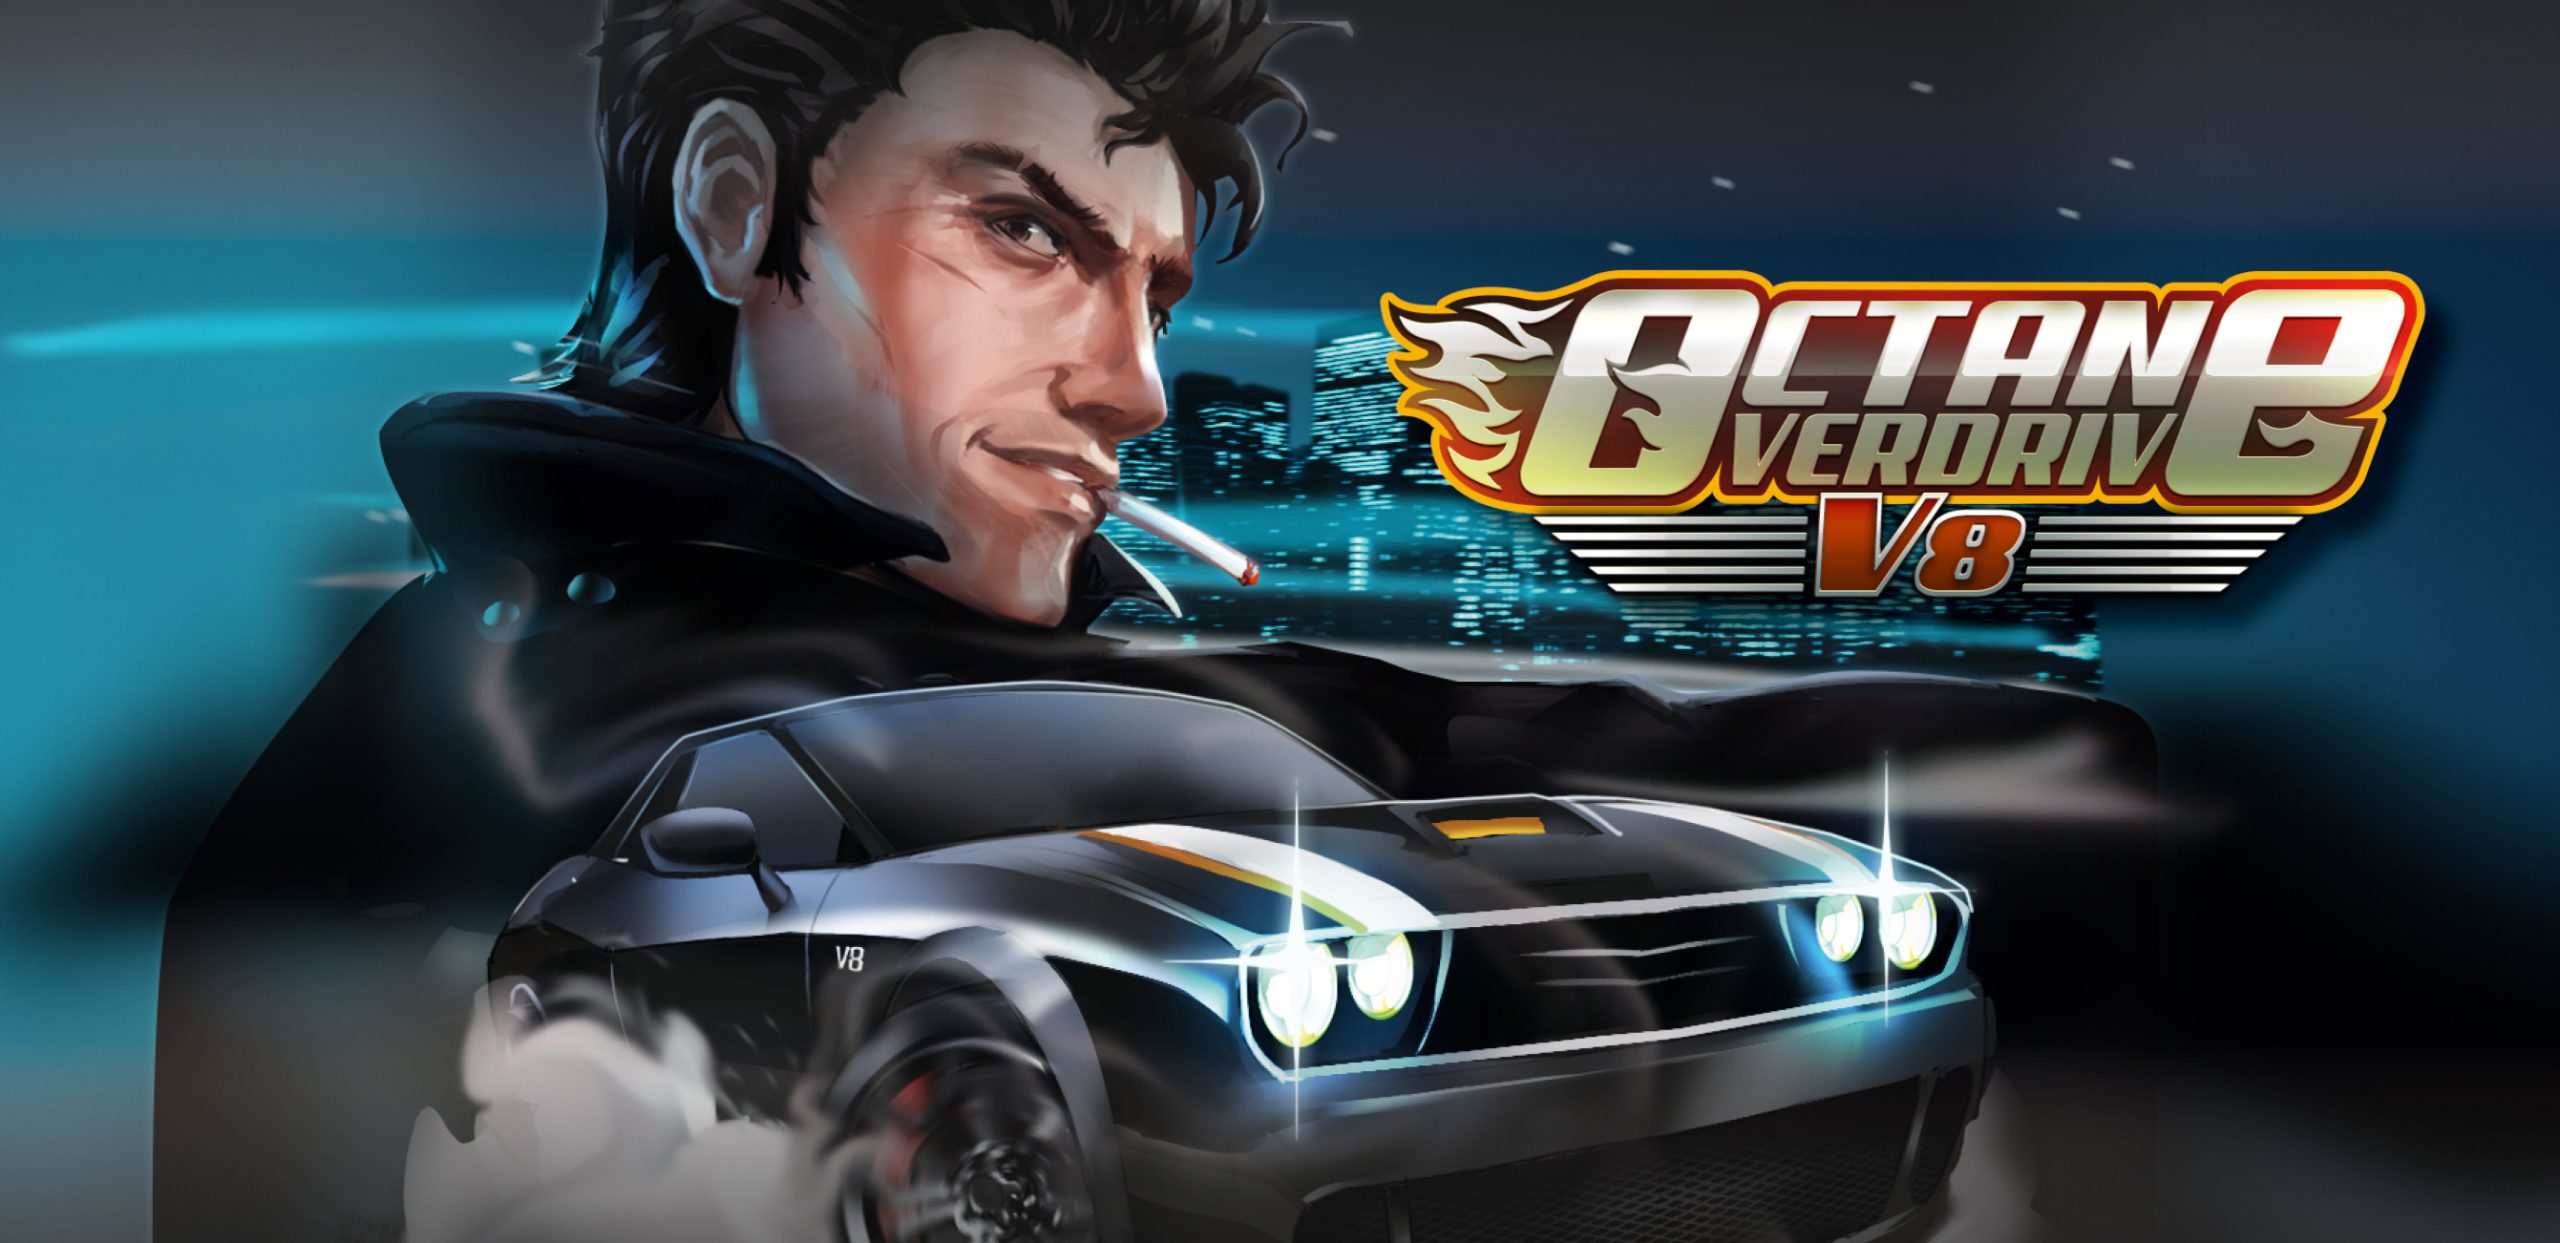 Experience the thrill of speed with the Octane Overdrive V8 Dice Slot on betFIRST Casino